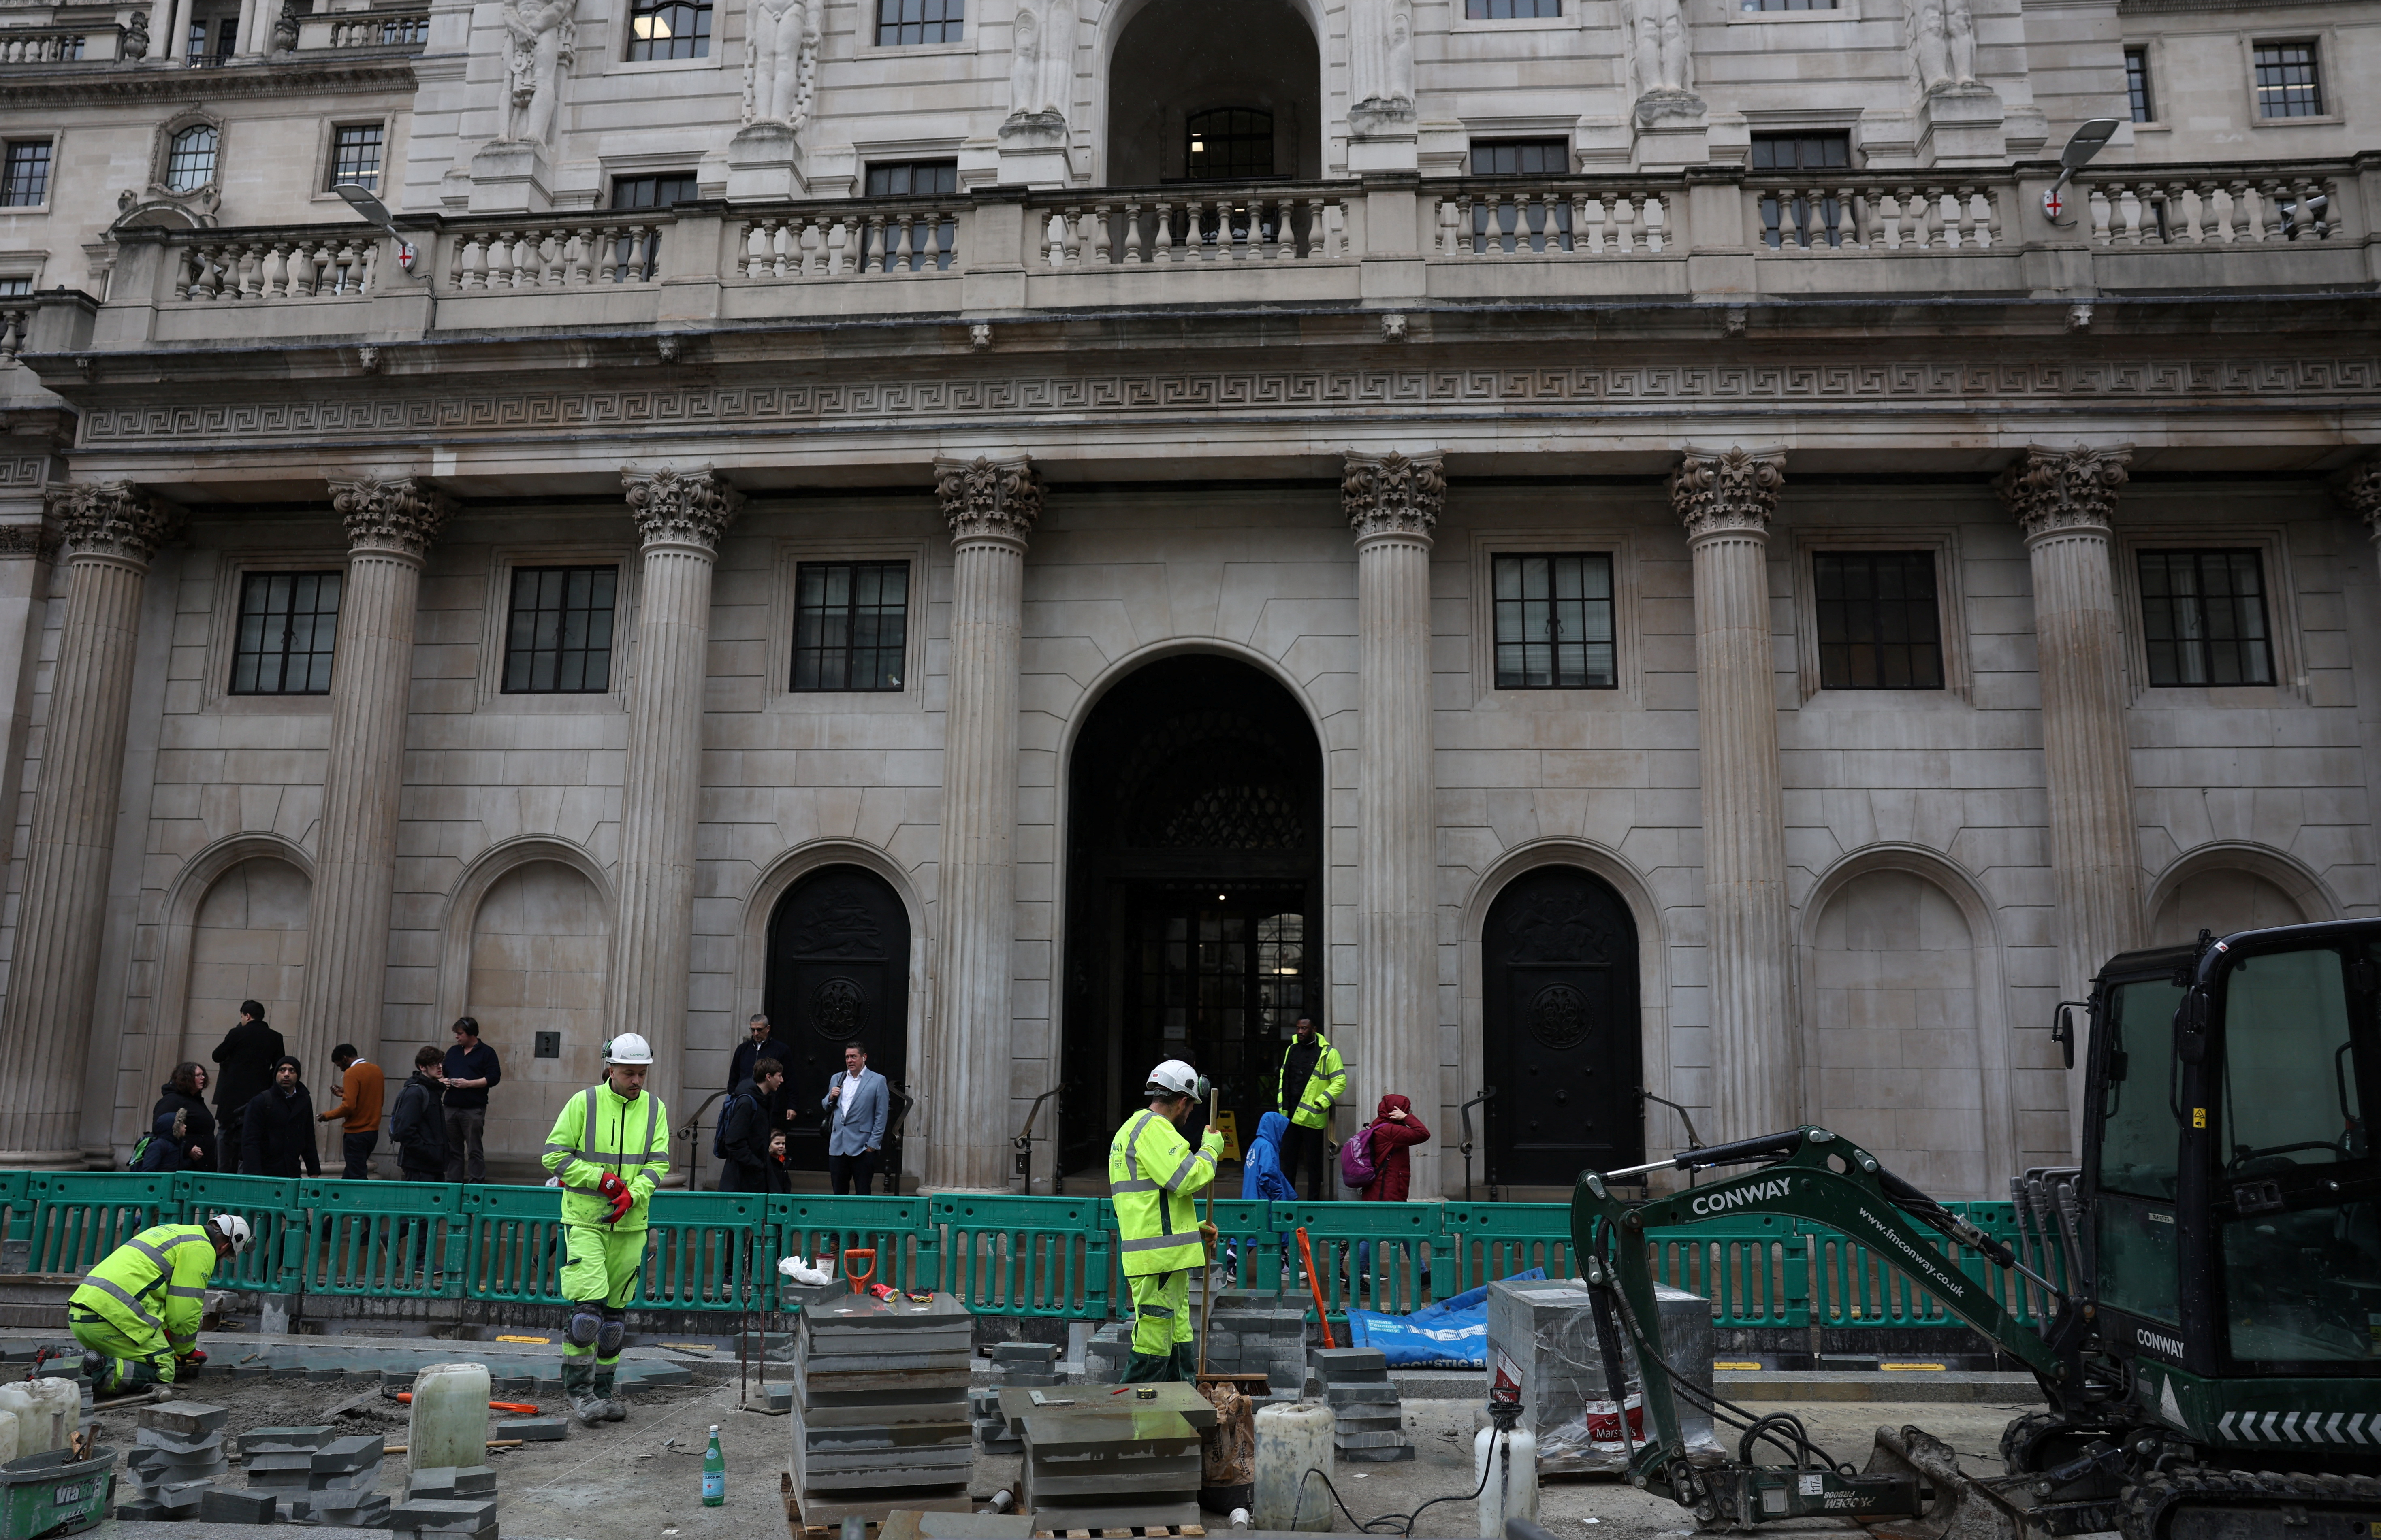 Road construction workers carry out work outside the Bank of England in the City of London financial district